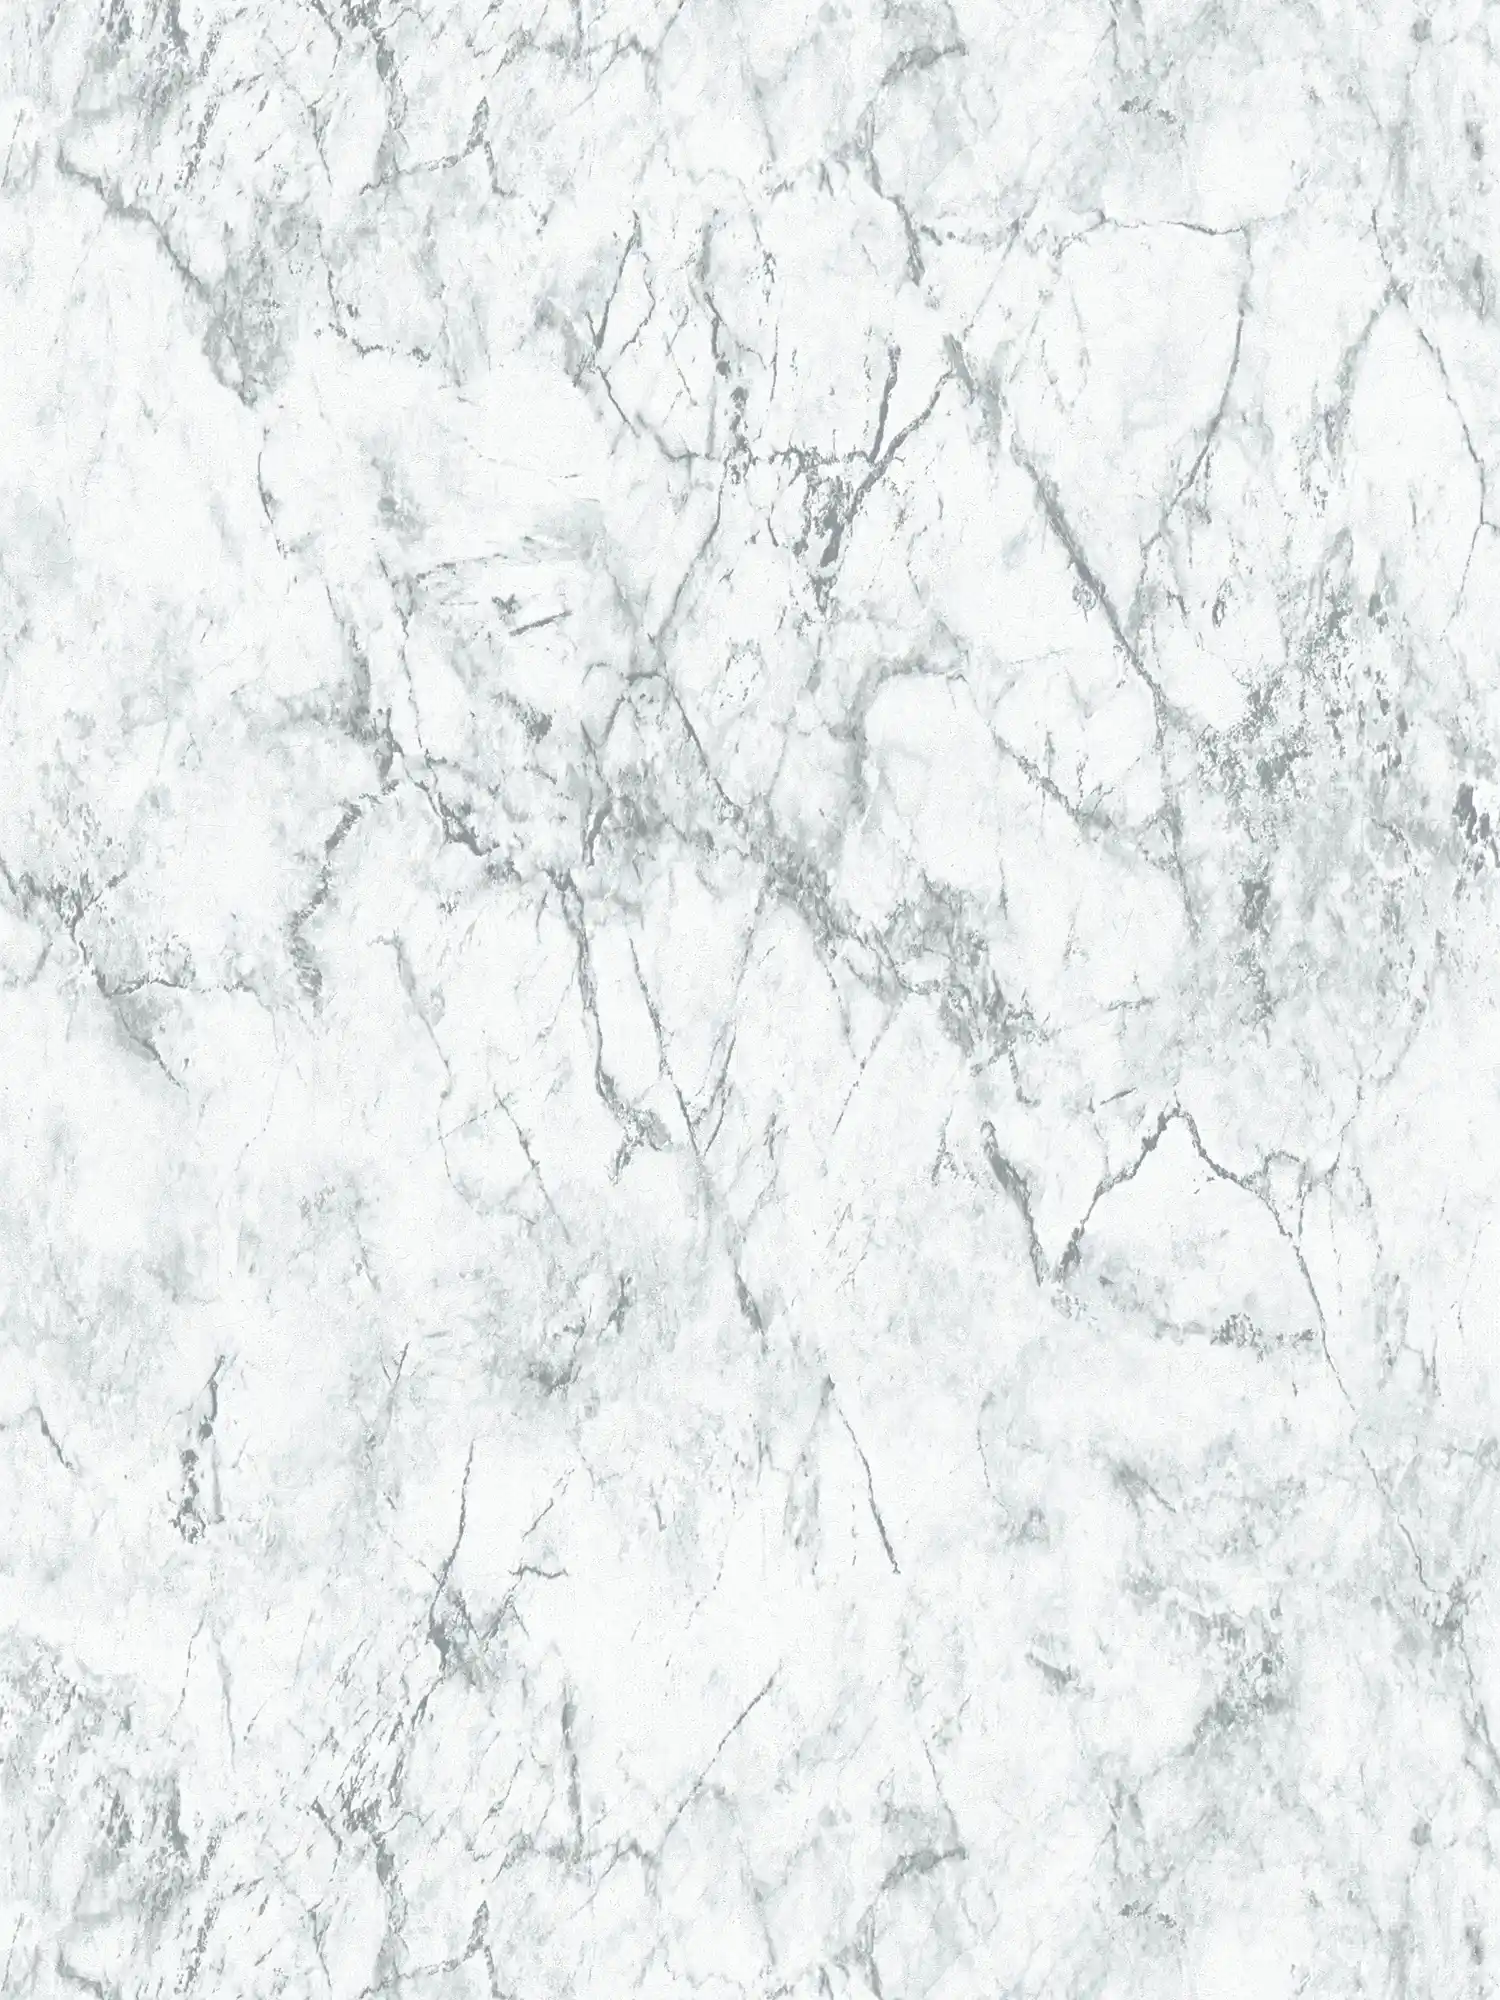         Non-woven wallpaper with fine marble look - white, grey
    